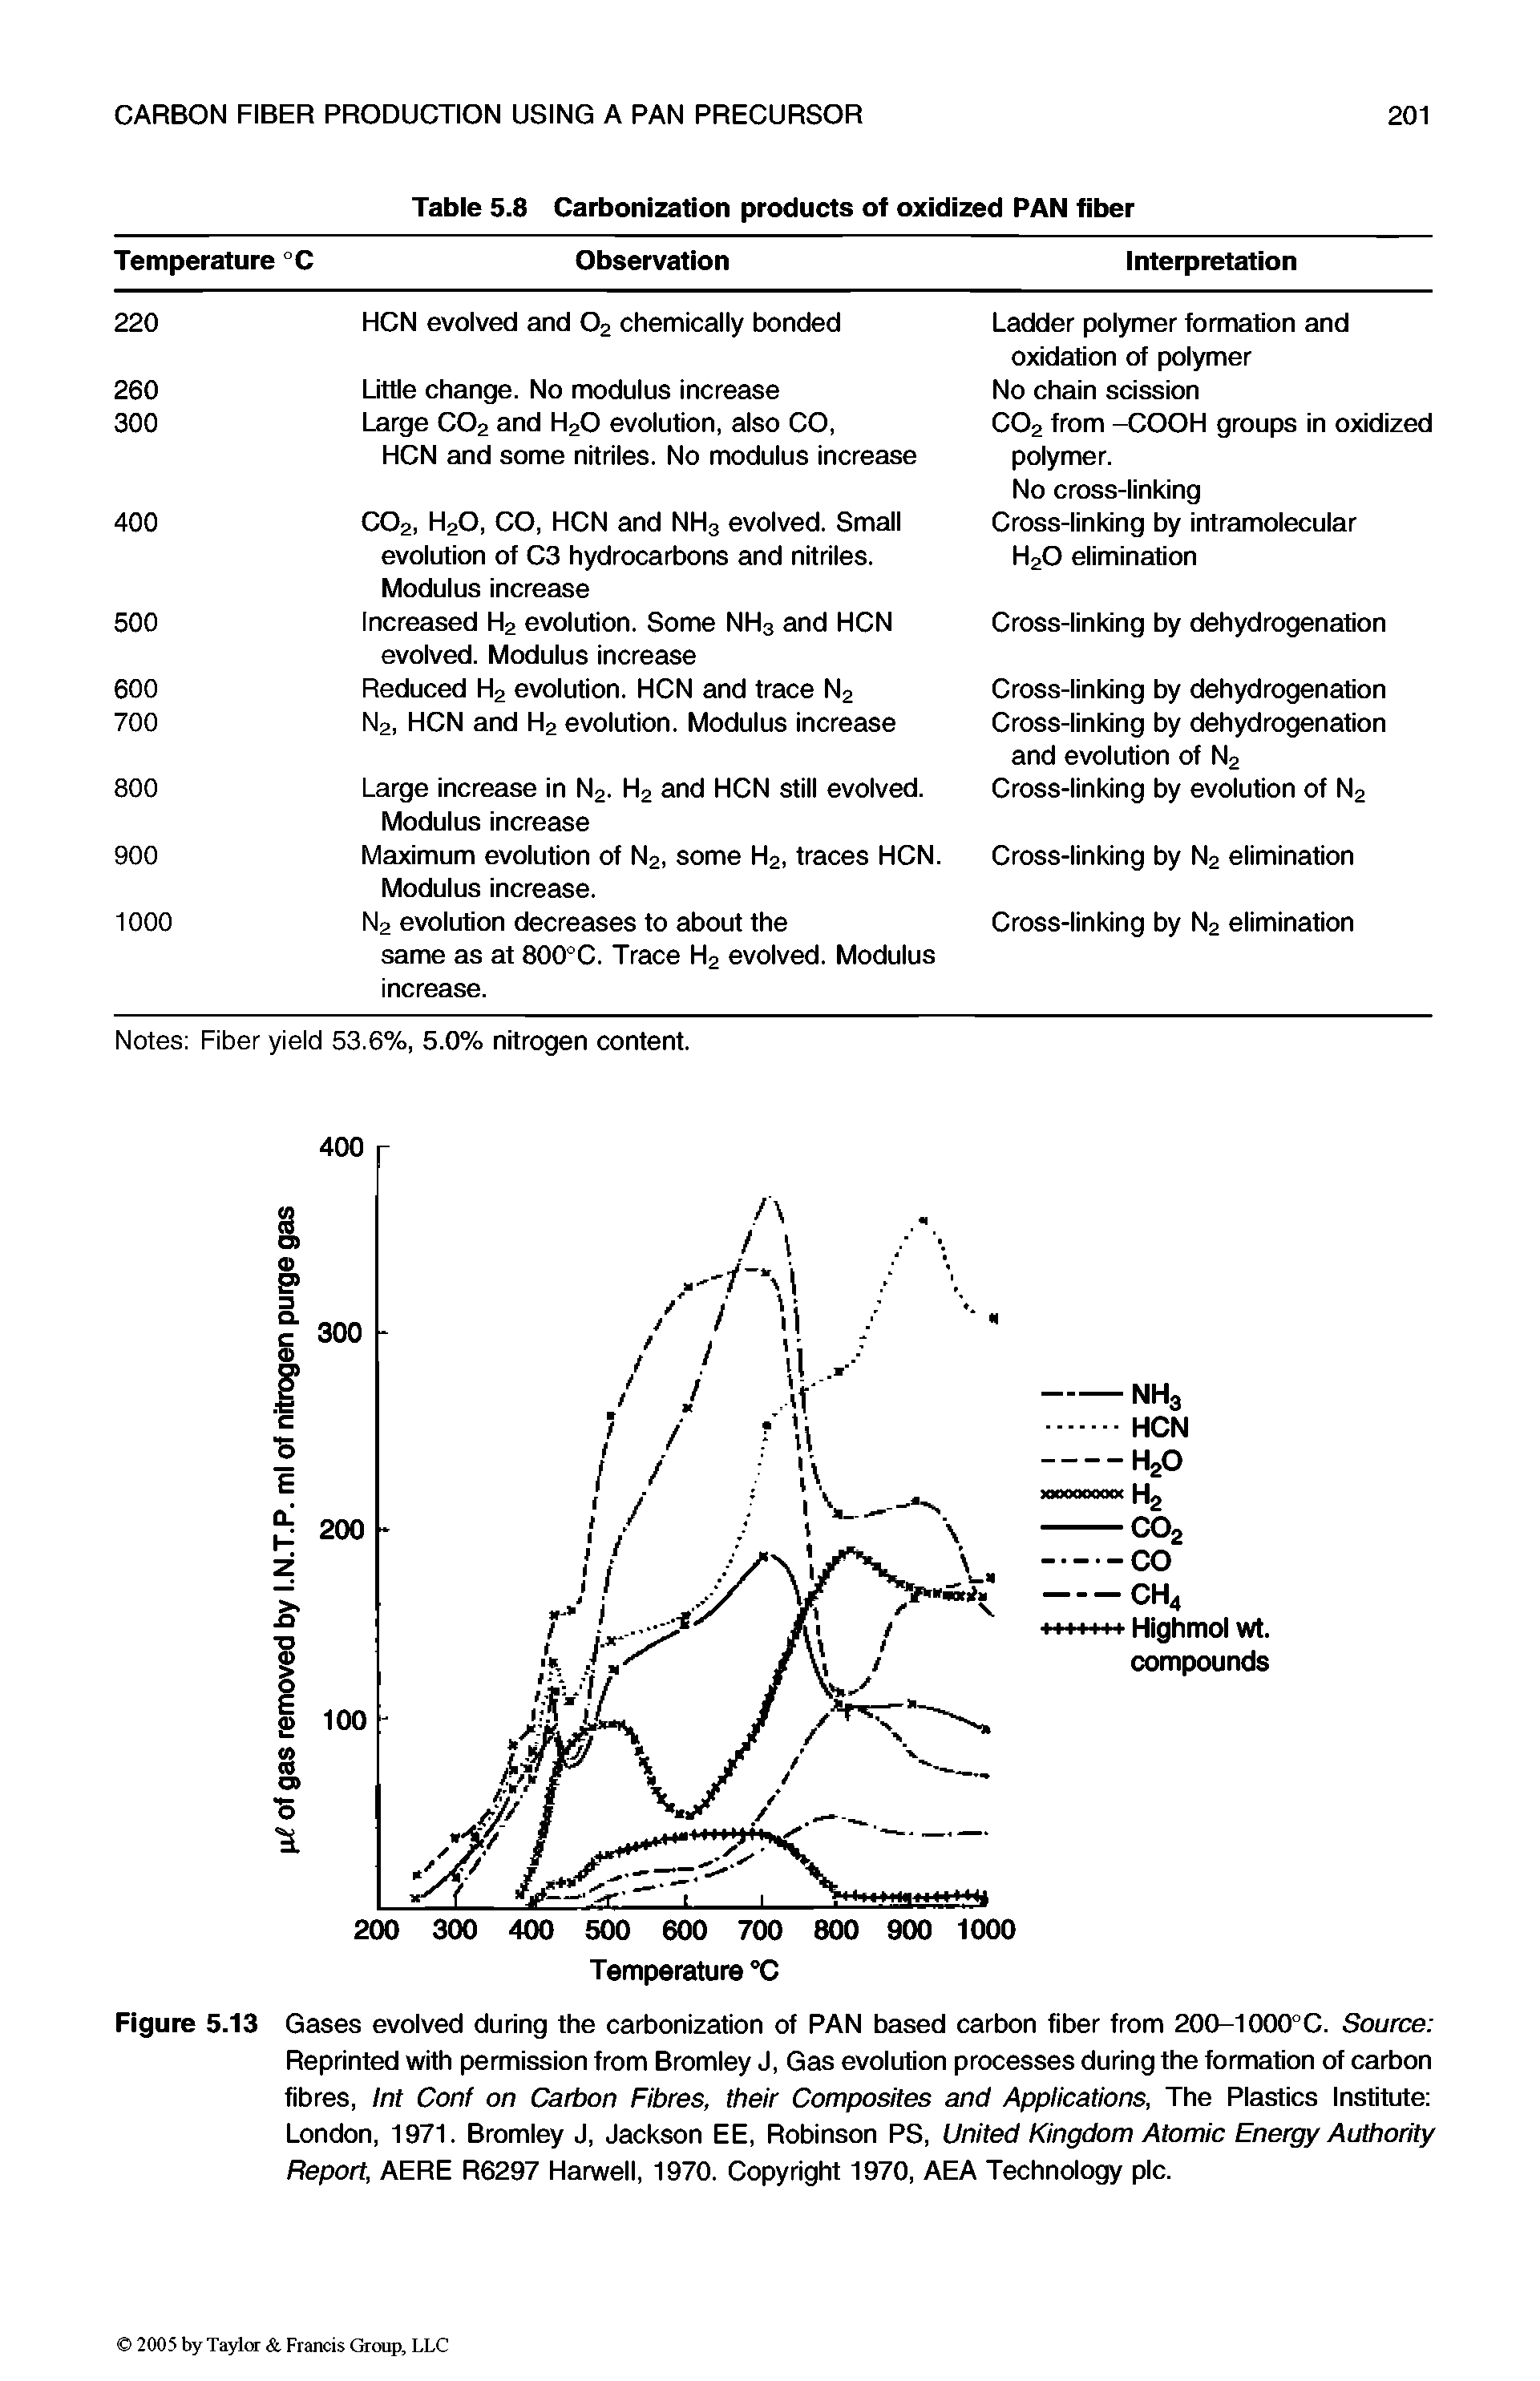 Figure 5.13 Gases evolved during the carbonization of PAN based carbon fiber from 200-1000°C. Source Reprinted with permission from Bromley J, Gas evolution processes during the formation of carbon fibres, Int Conf on Carbon Fibres, their Composites and Applications, The Plastics Institute London, 1971. Bromley J, Jackson EE, Robinson PS, United Kingdom Atomic Energy Authority Report, AERE R6297 Harwell, 1970. Copyright 1970, AEA Technology pic.